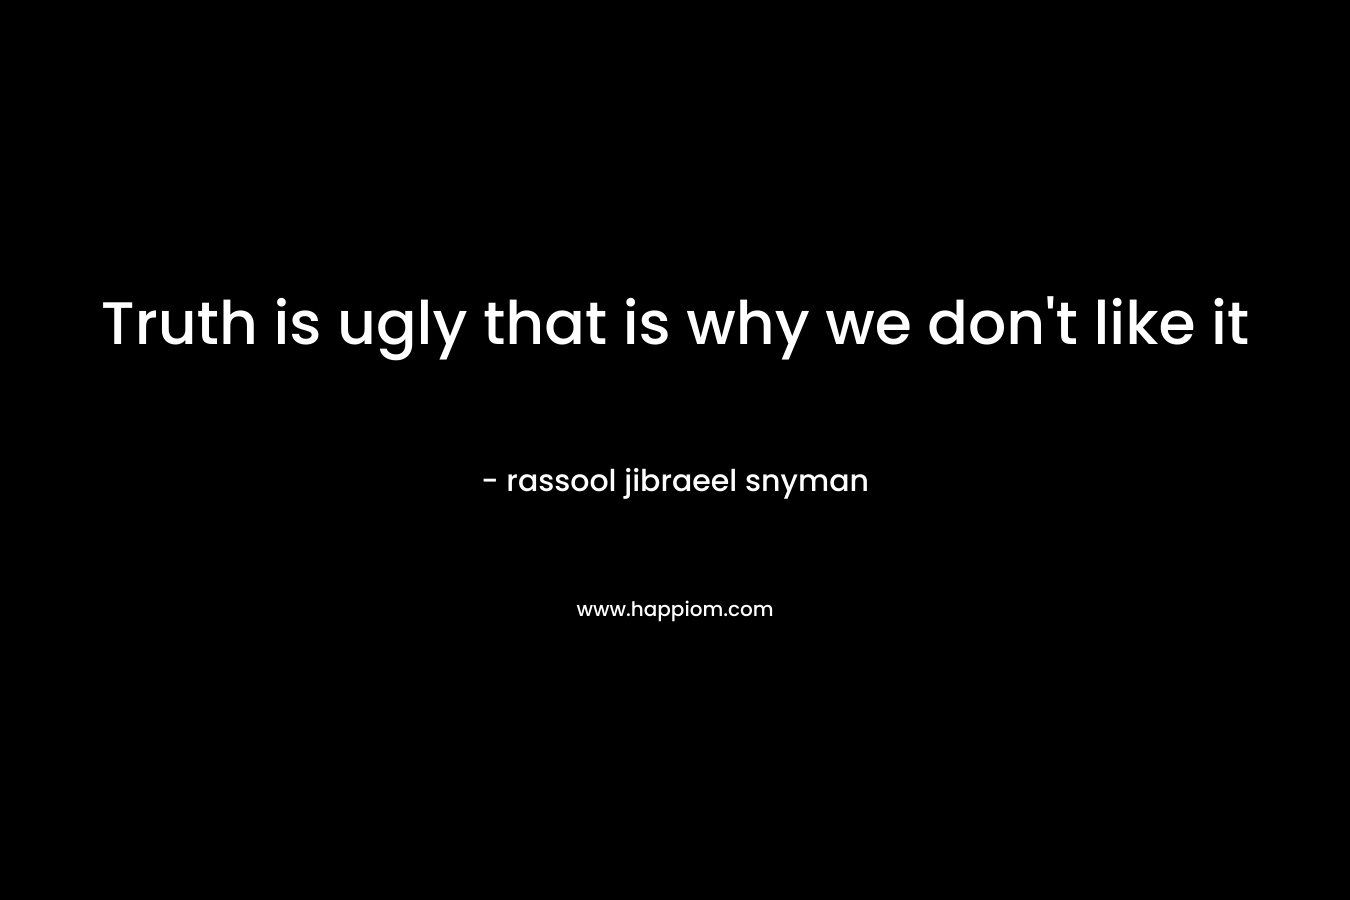 Truth is ugly that is why we don't like it